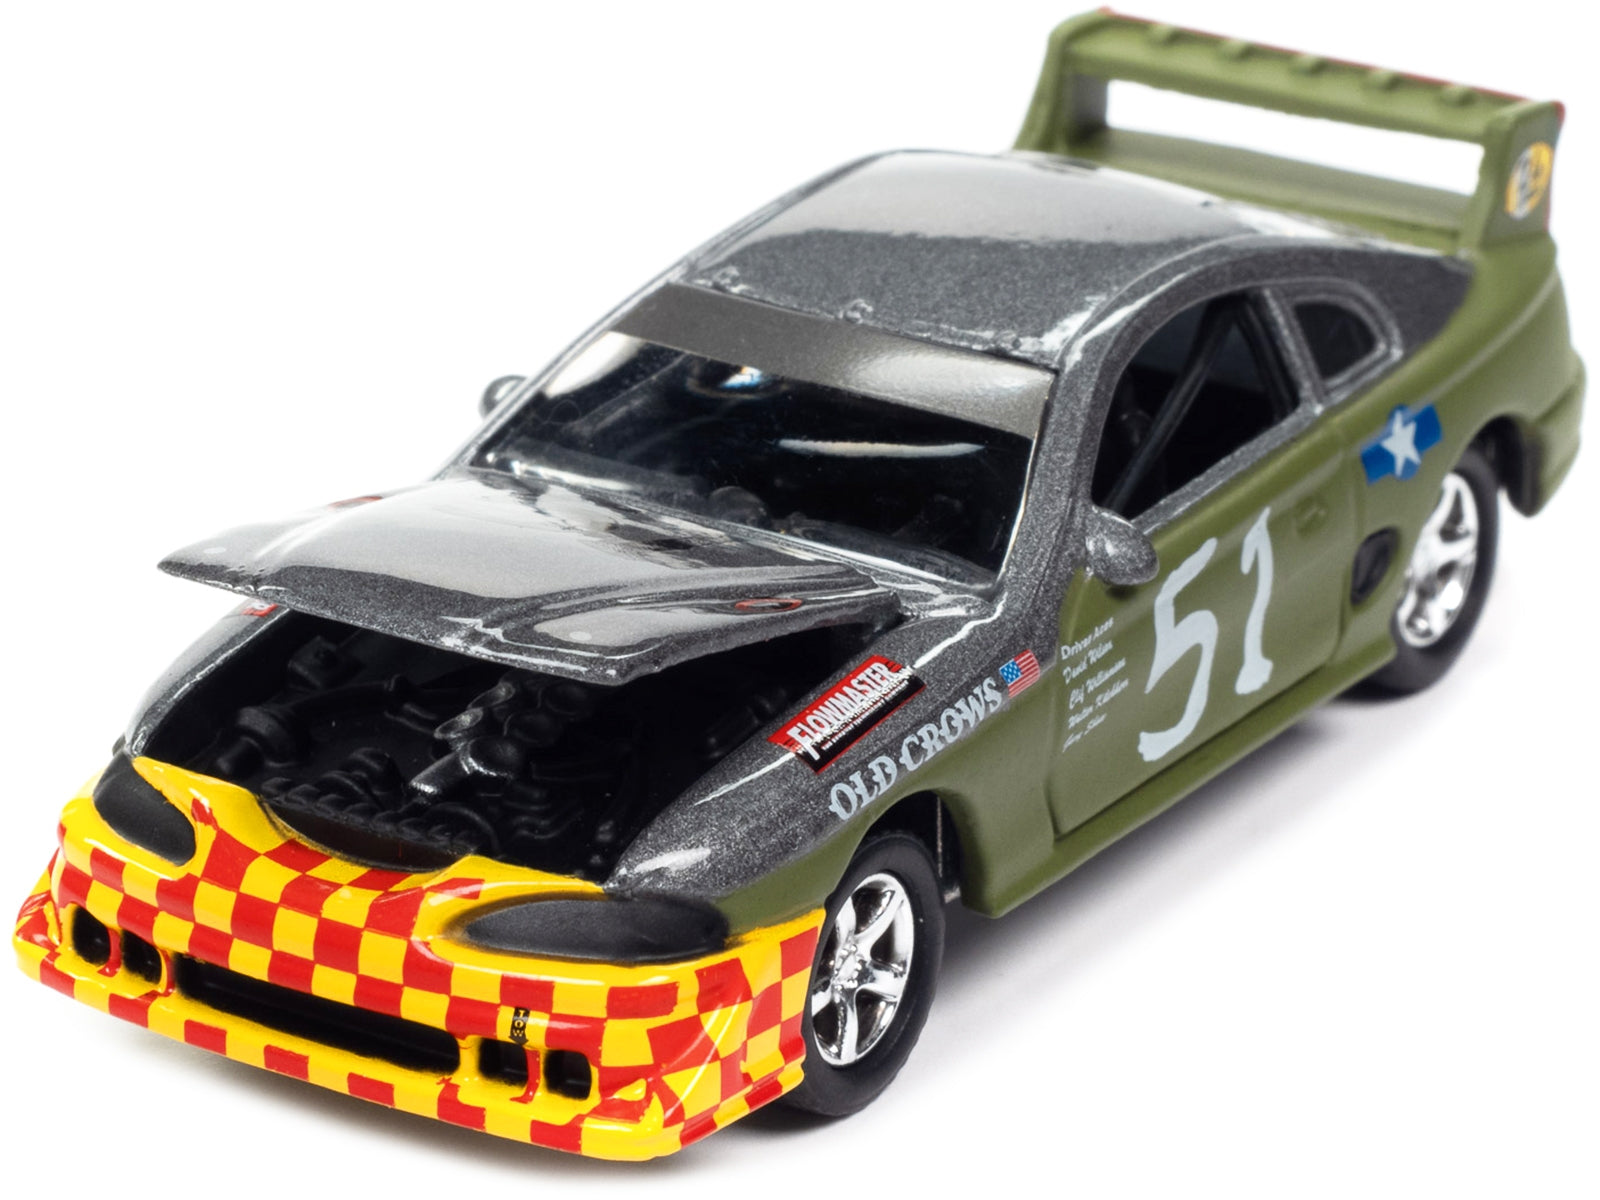 1990s Ford Mustang Race Car #51 Military Green and Dark Silver Metallic "Old Crows" "24 Hours of Lemons" Limited Edition to 4740 pieces Worldwide "Street Freaks" Series 1/64 Diecast Model Car by Johnny Lightning Johnny Lightning